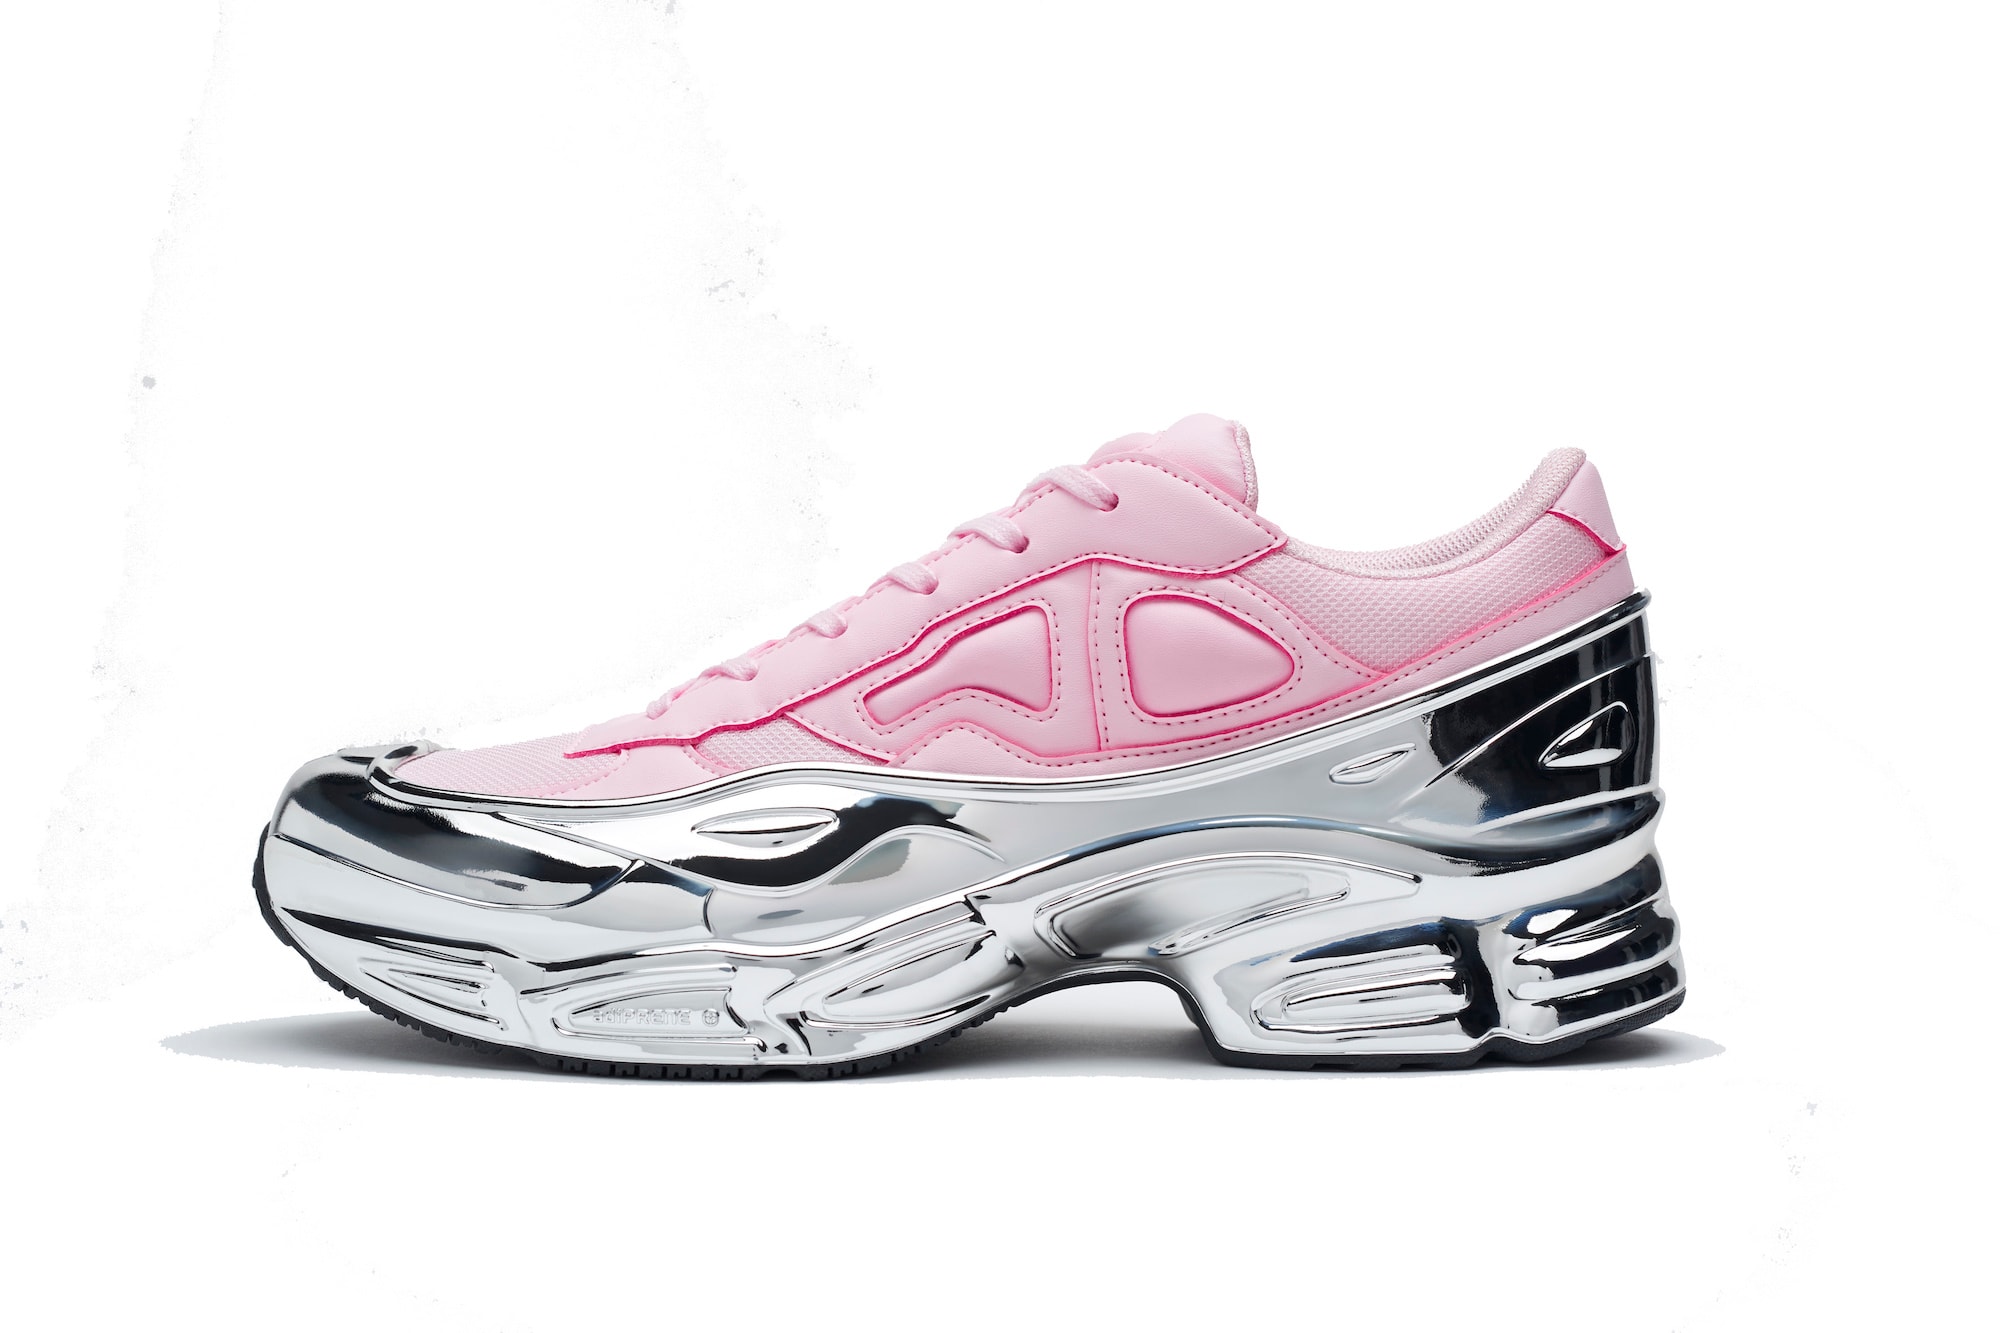 adidas by Raf Simons RS Ozweego Metallic Silver Release Colorways Sneakers 